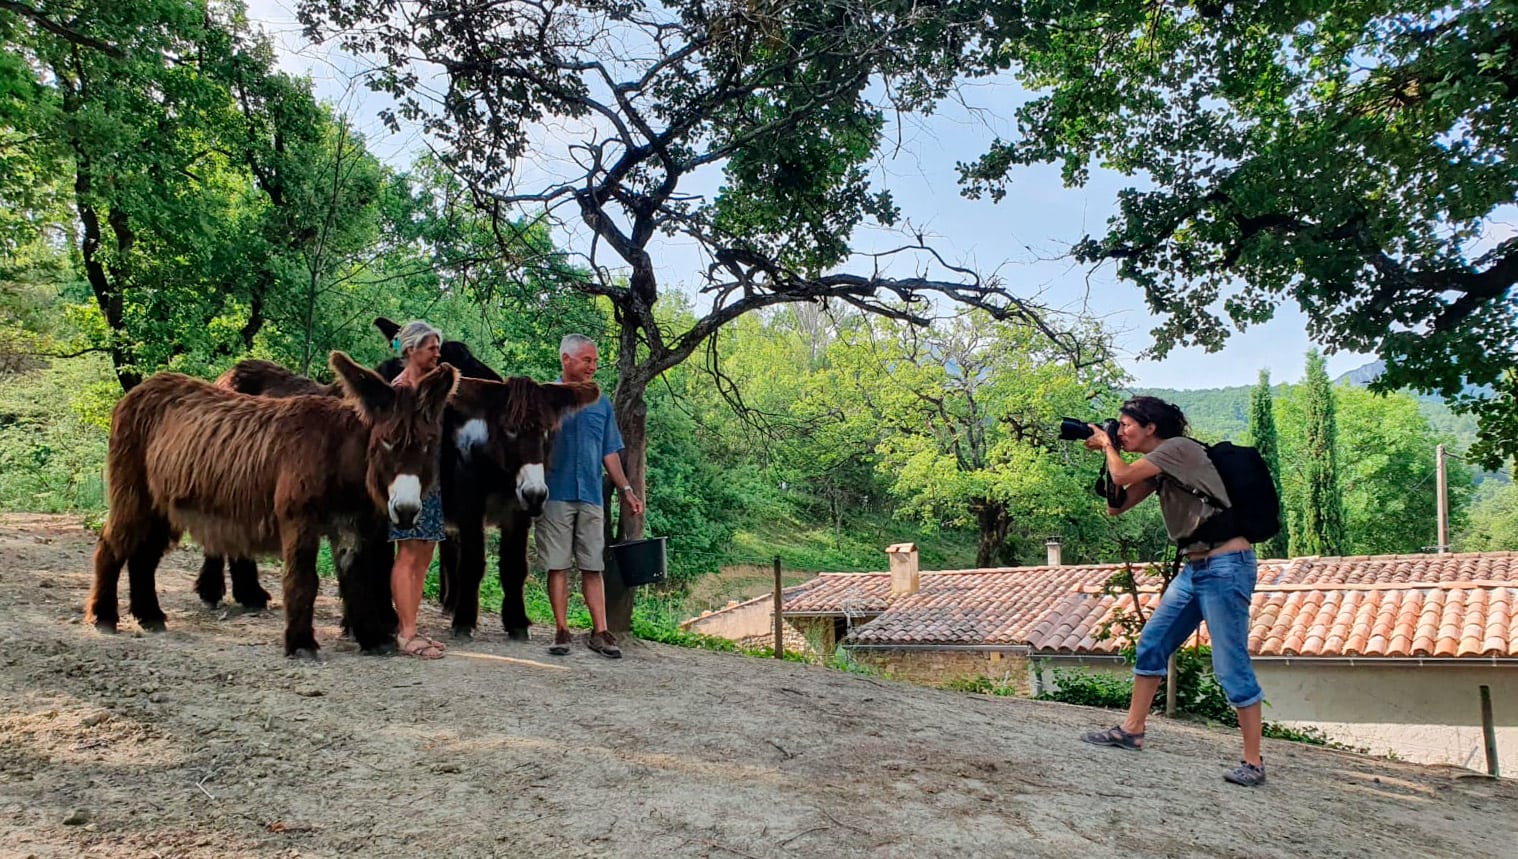 Photographer taking a picture of a man and woman and 3 donkeys